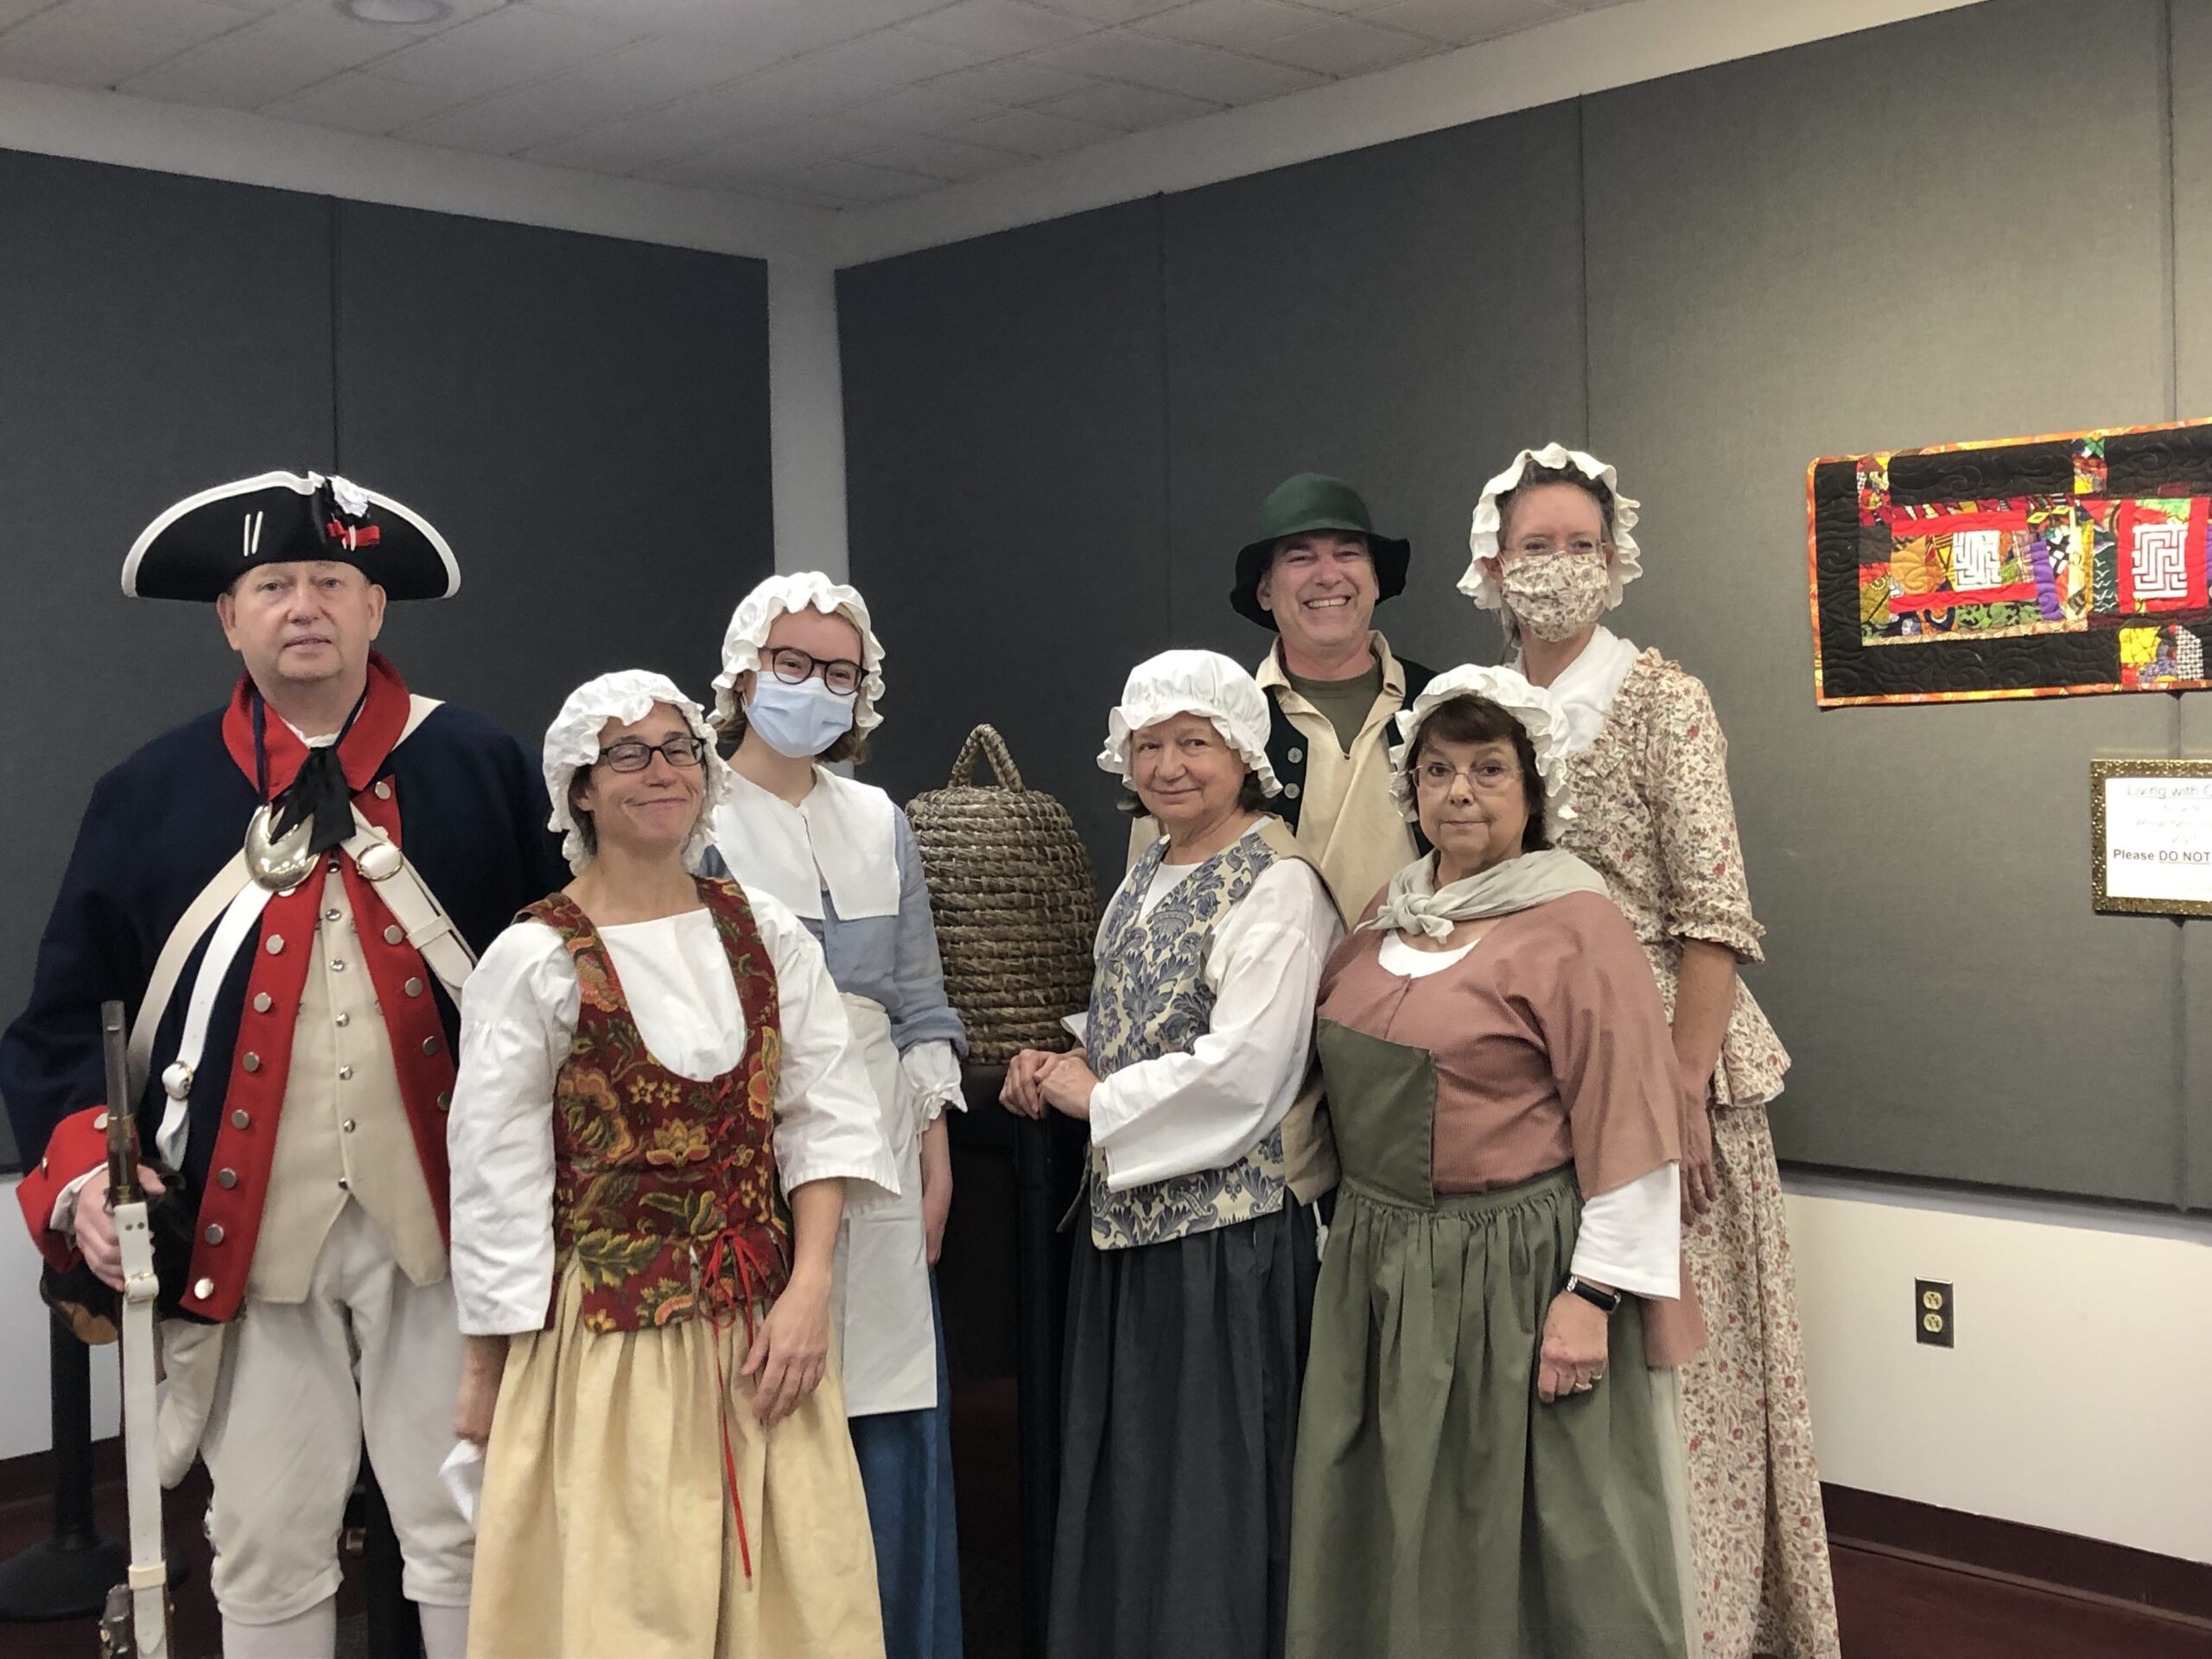 people dressed in Colonial American costumes